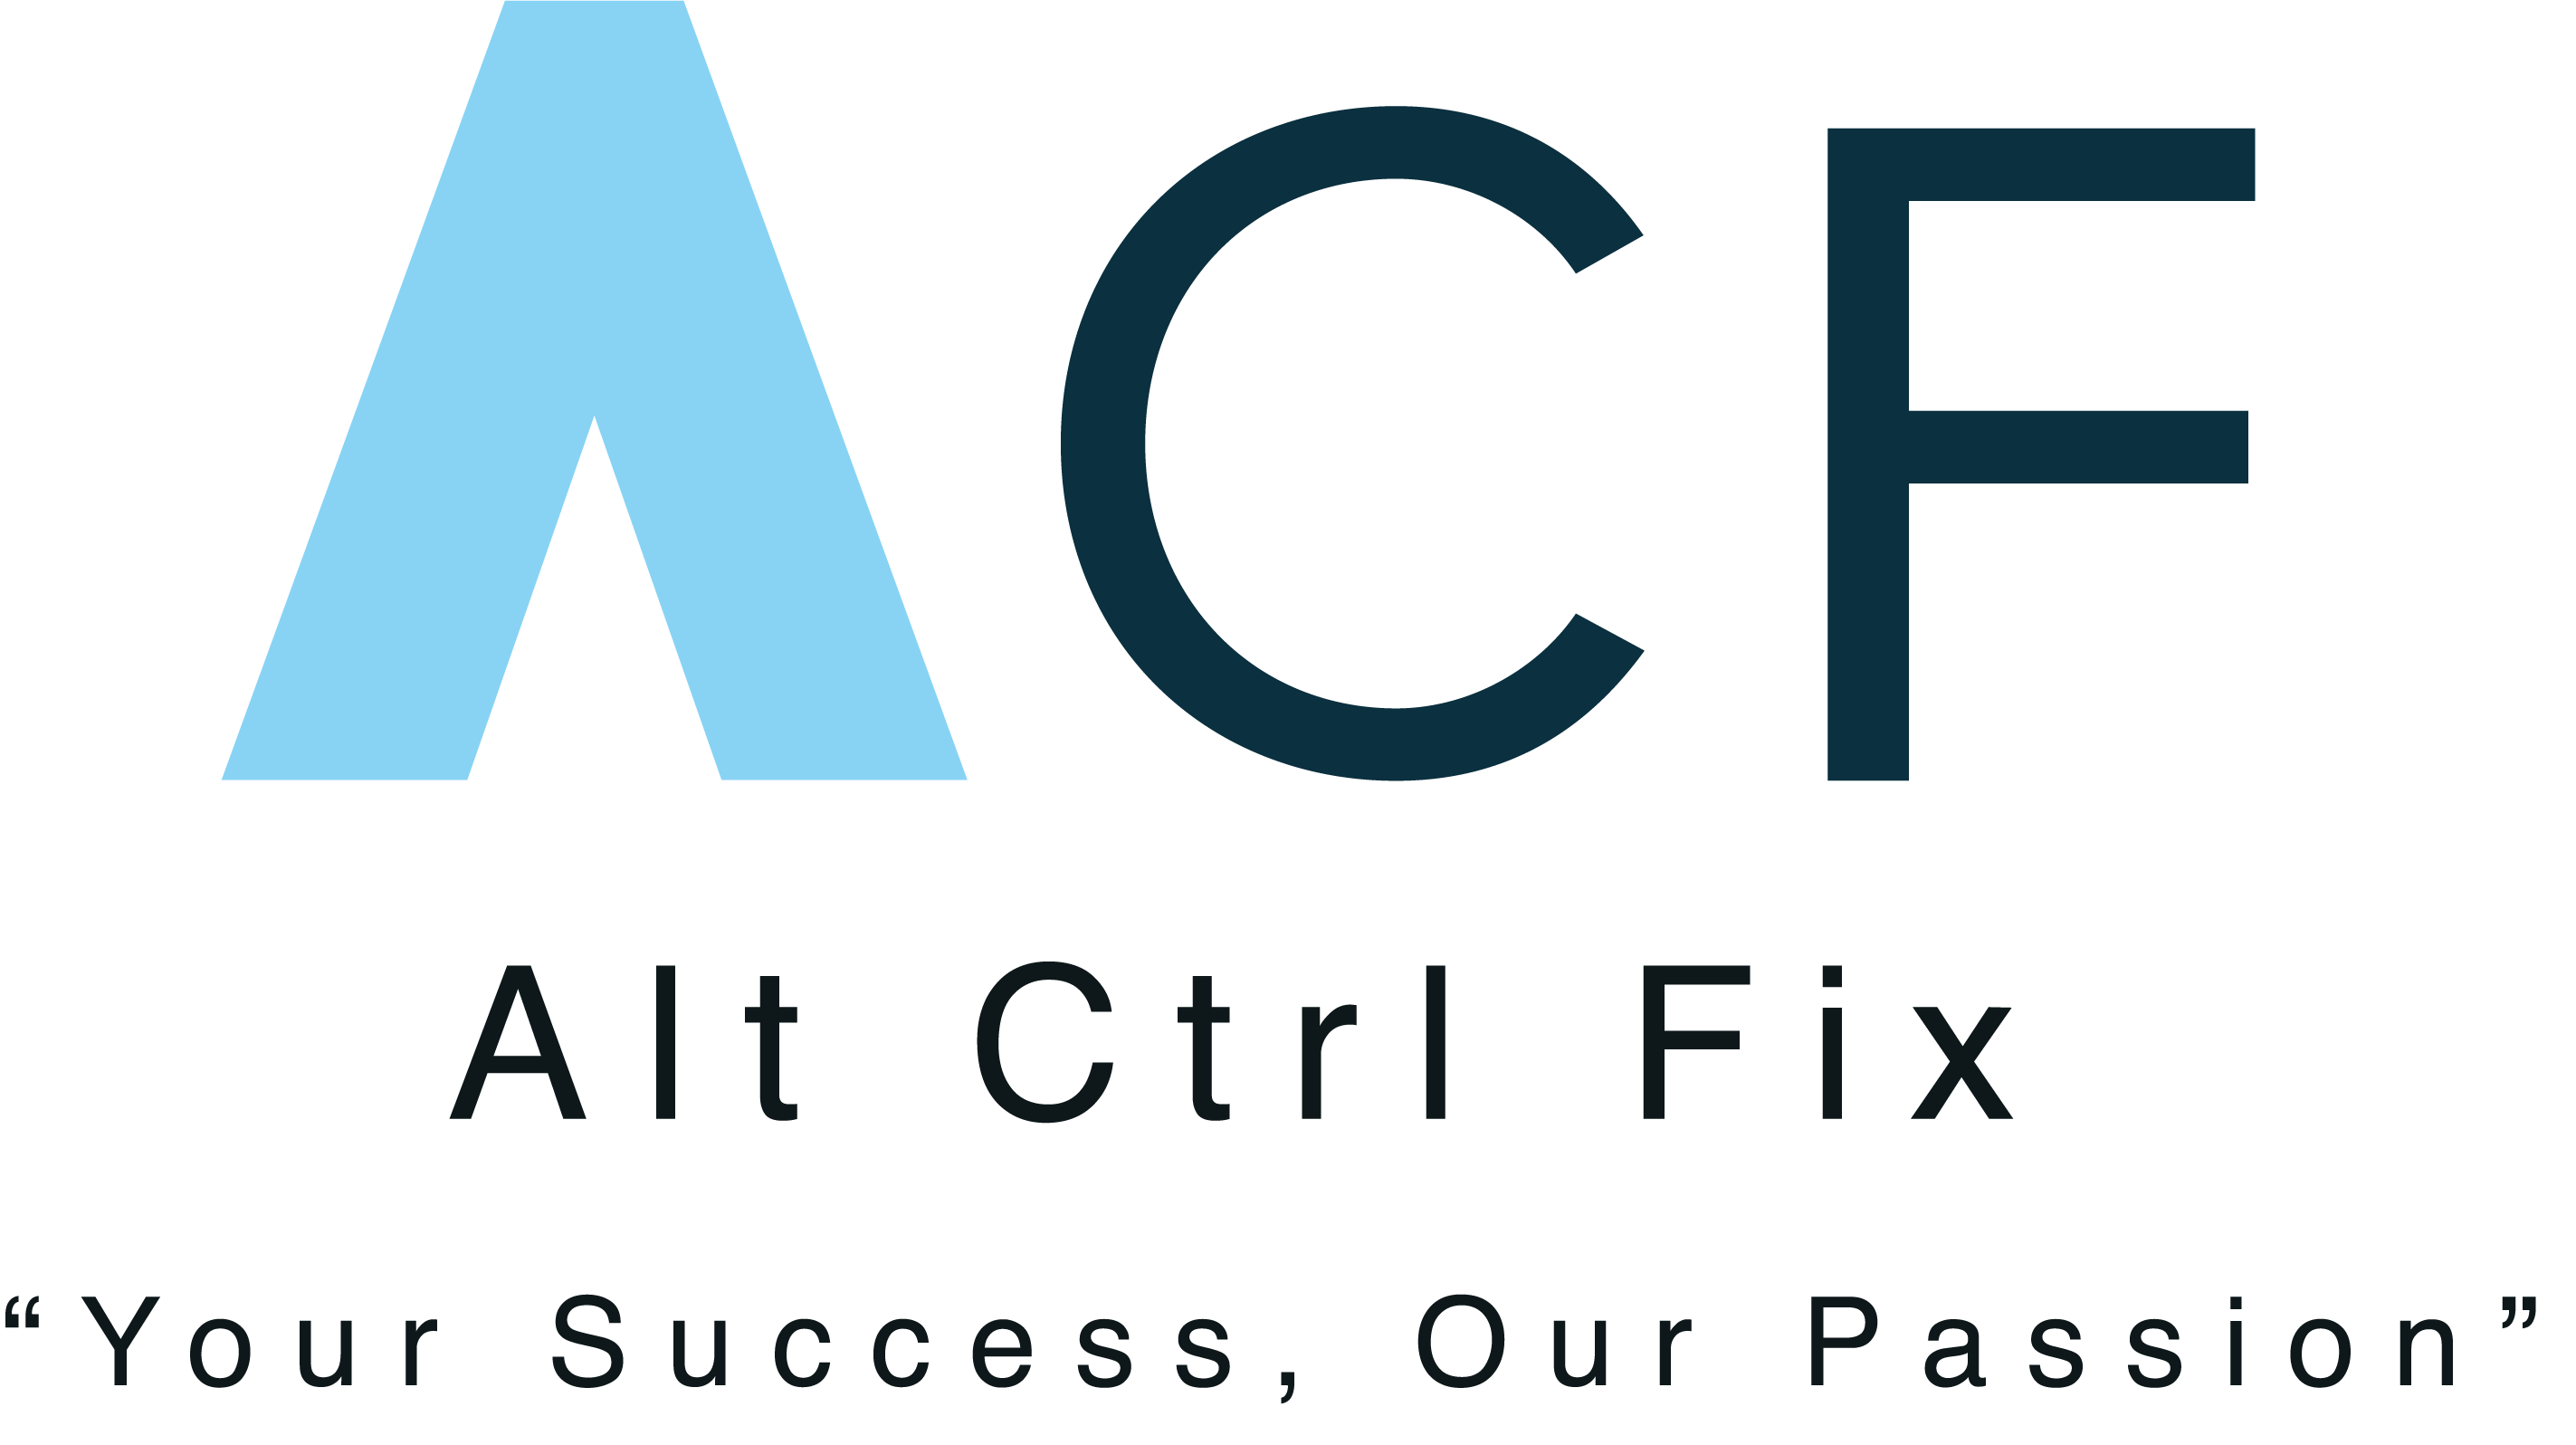 AltCtrlFix Softwares and Business Consultancy Services